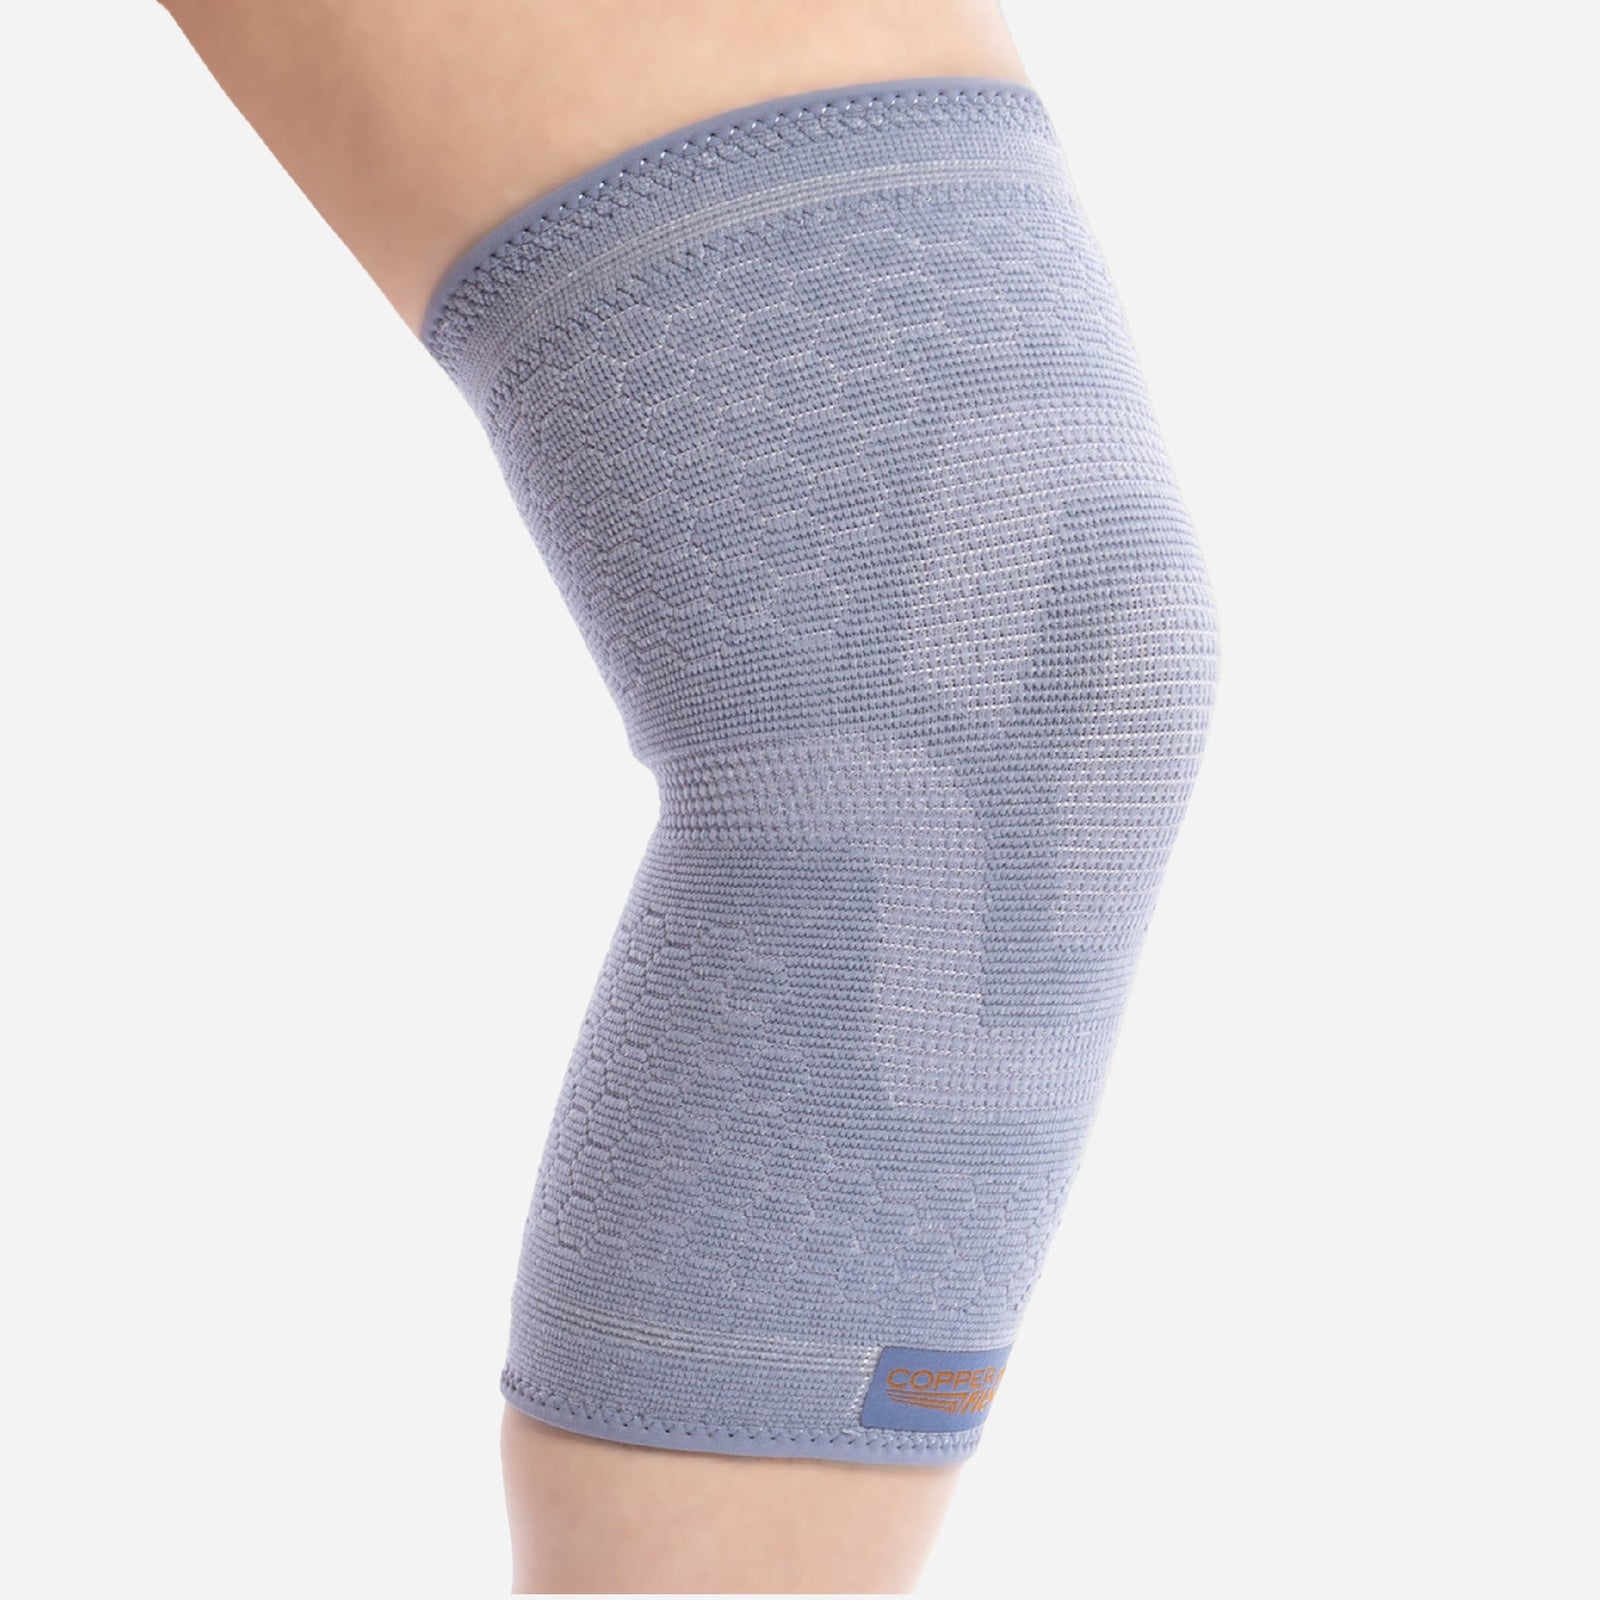 Ice Menthol Infused Compression Knee Sleeve by Copper Fit at Fleet Farm